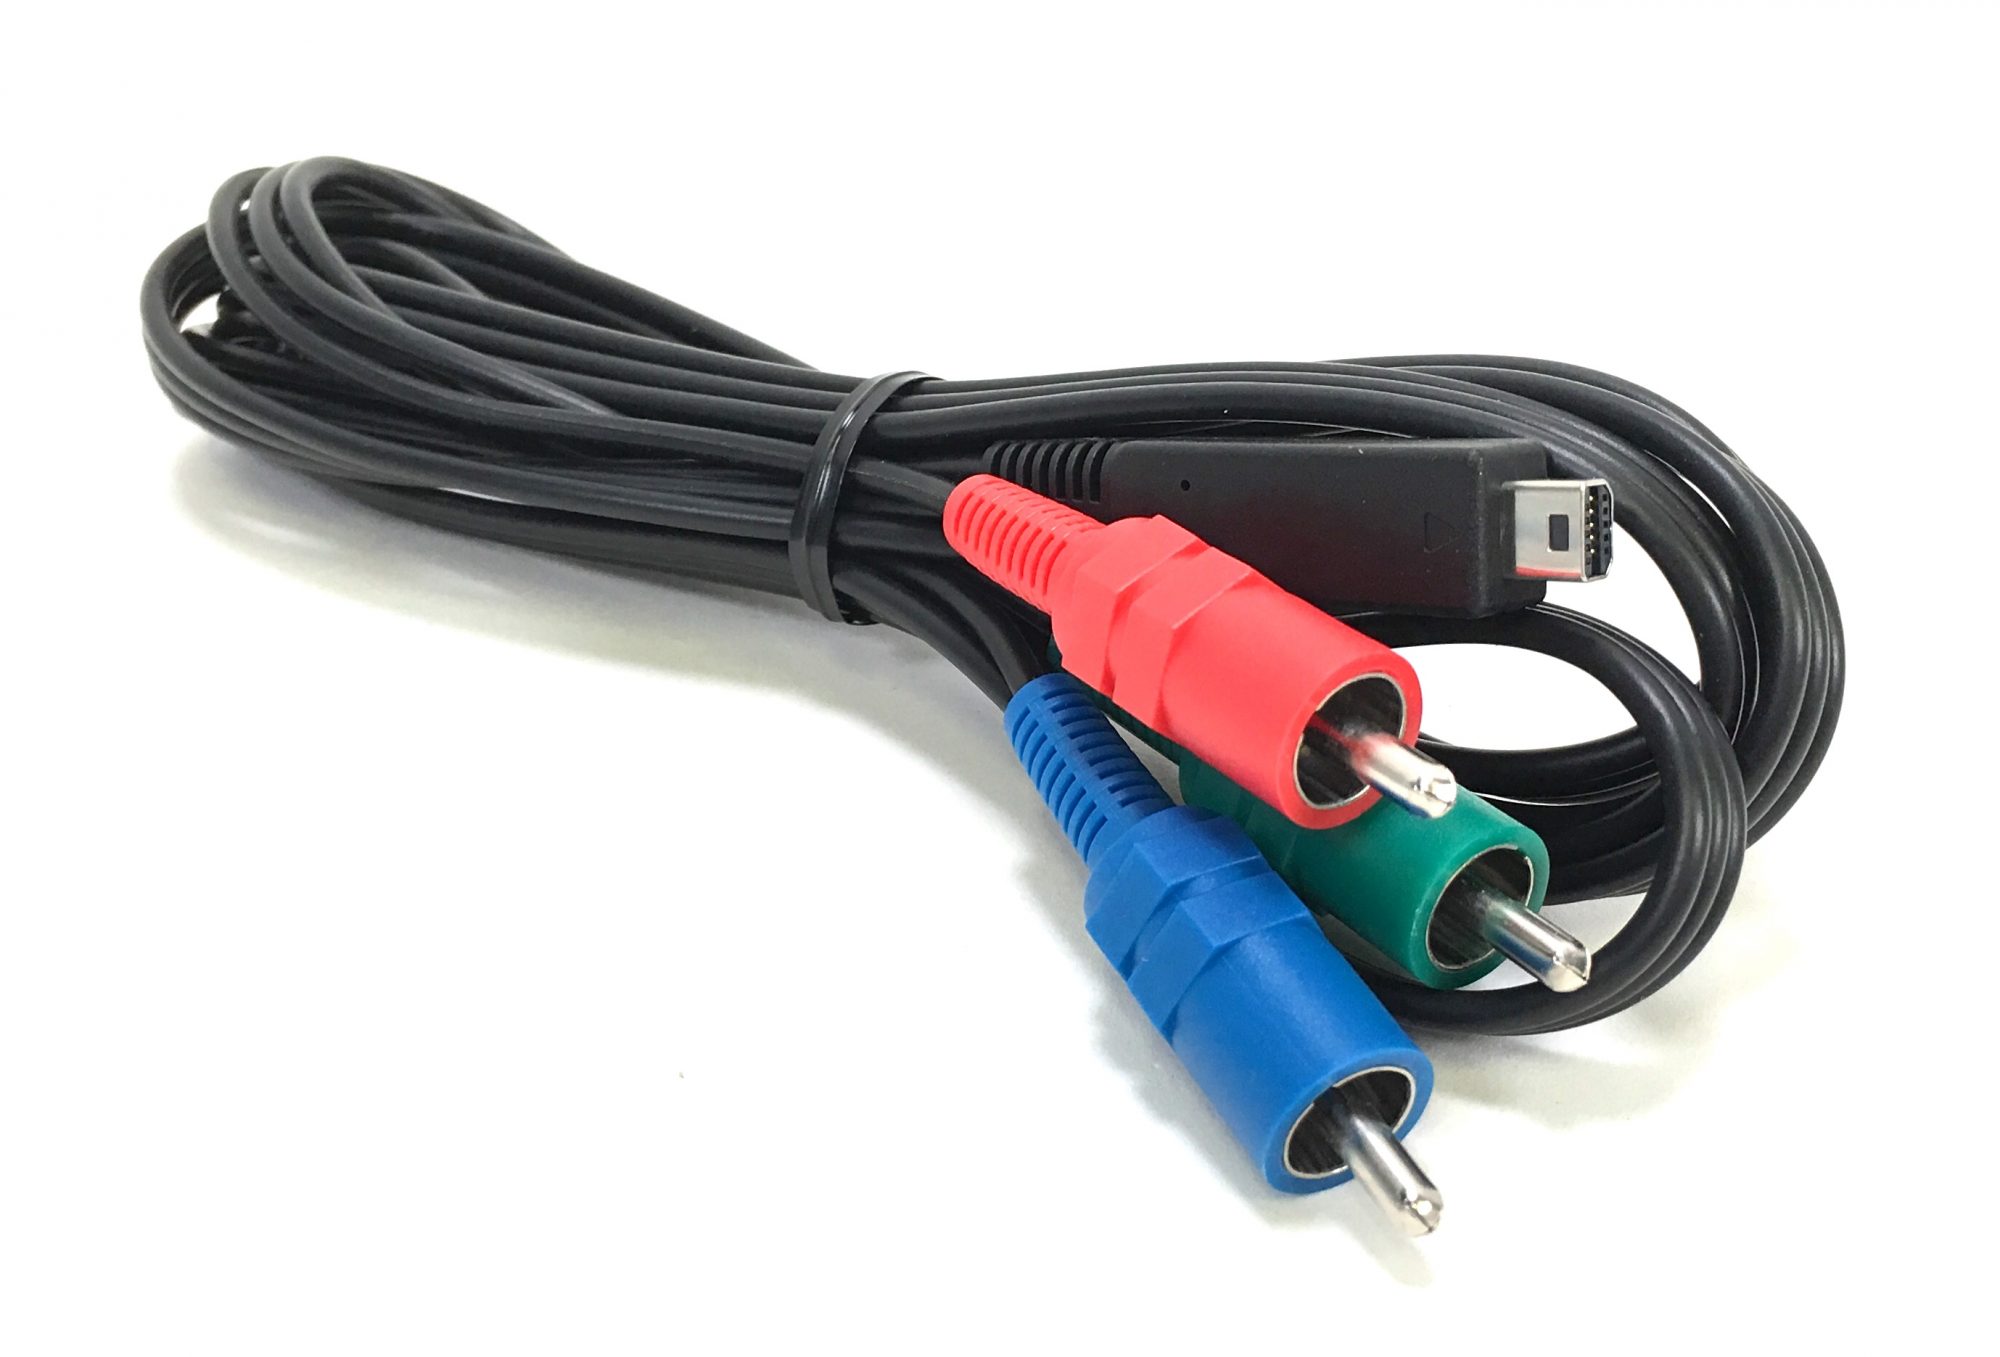 Original Component Video Cable that came with the Sony HVR-Z7U camcorder. It is a genuine Sony part, sourced directly from Sony USA. Brand new factory fresh. Free Shipping.